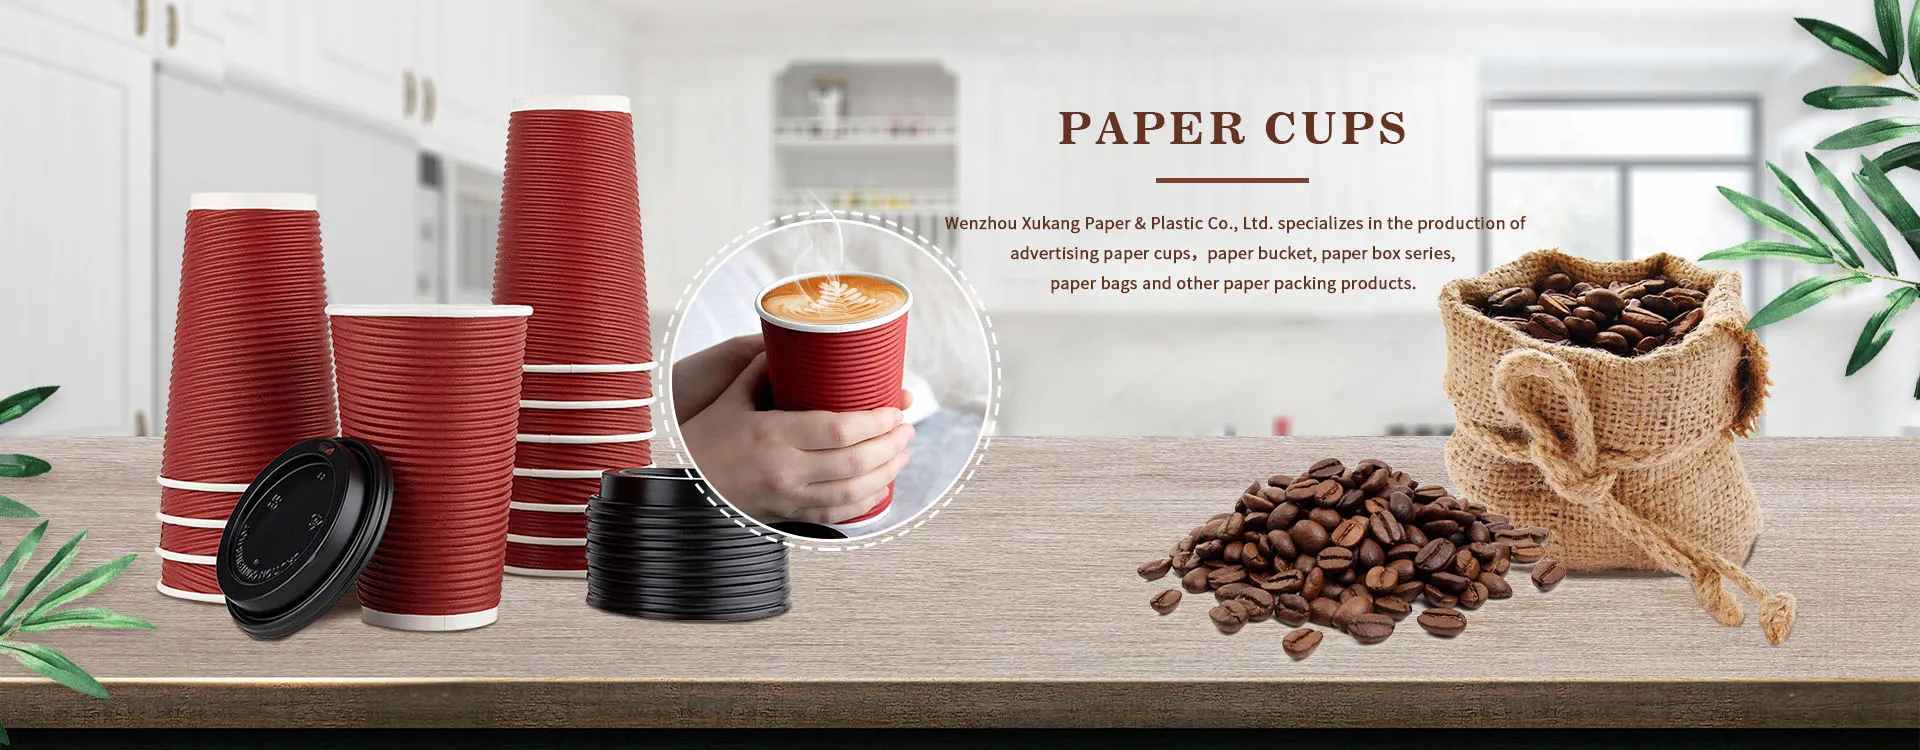 China Paper Cups